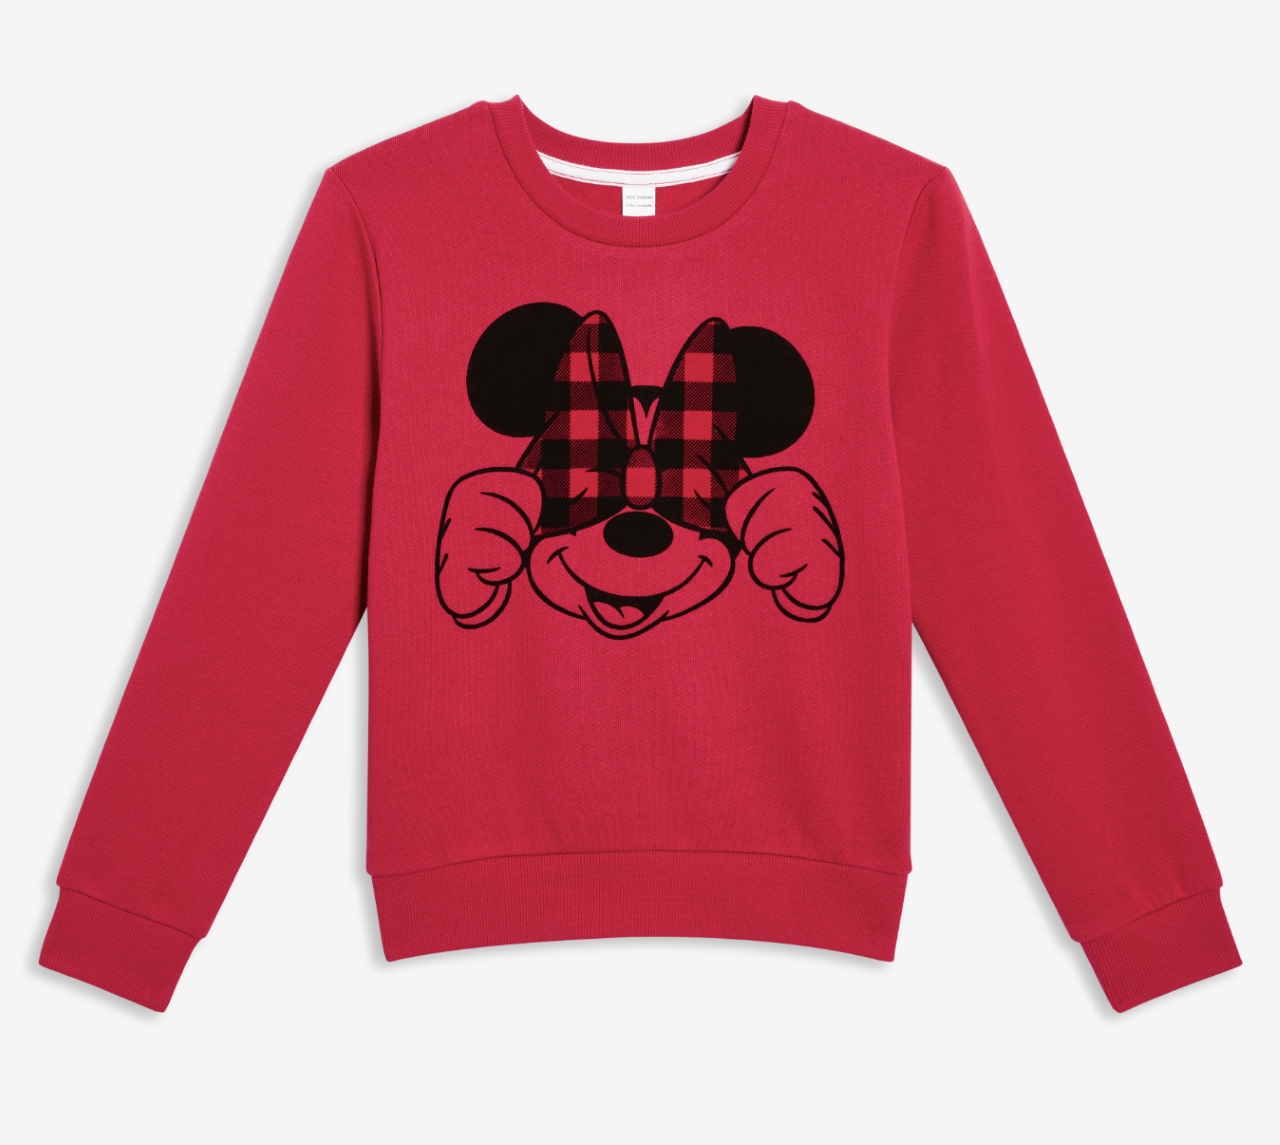 Red Mickey Mouse sweatshirt.